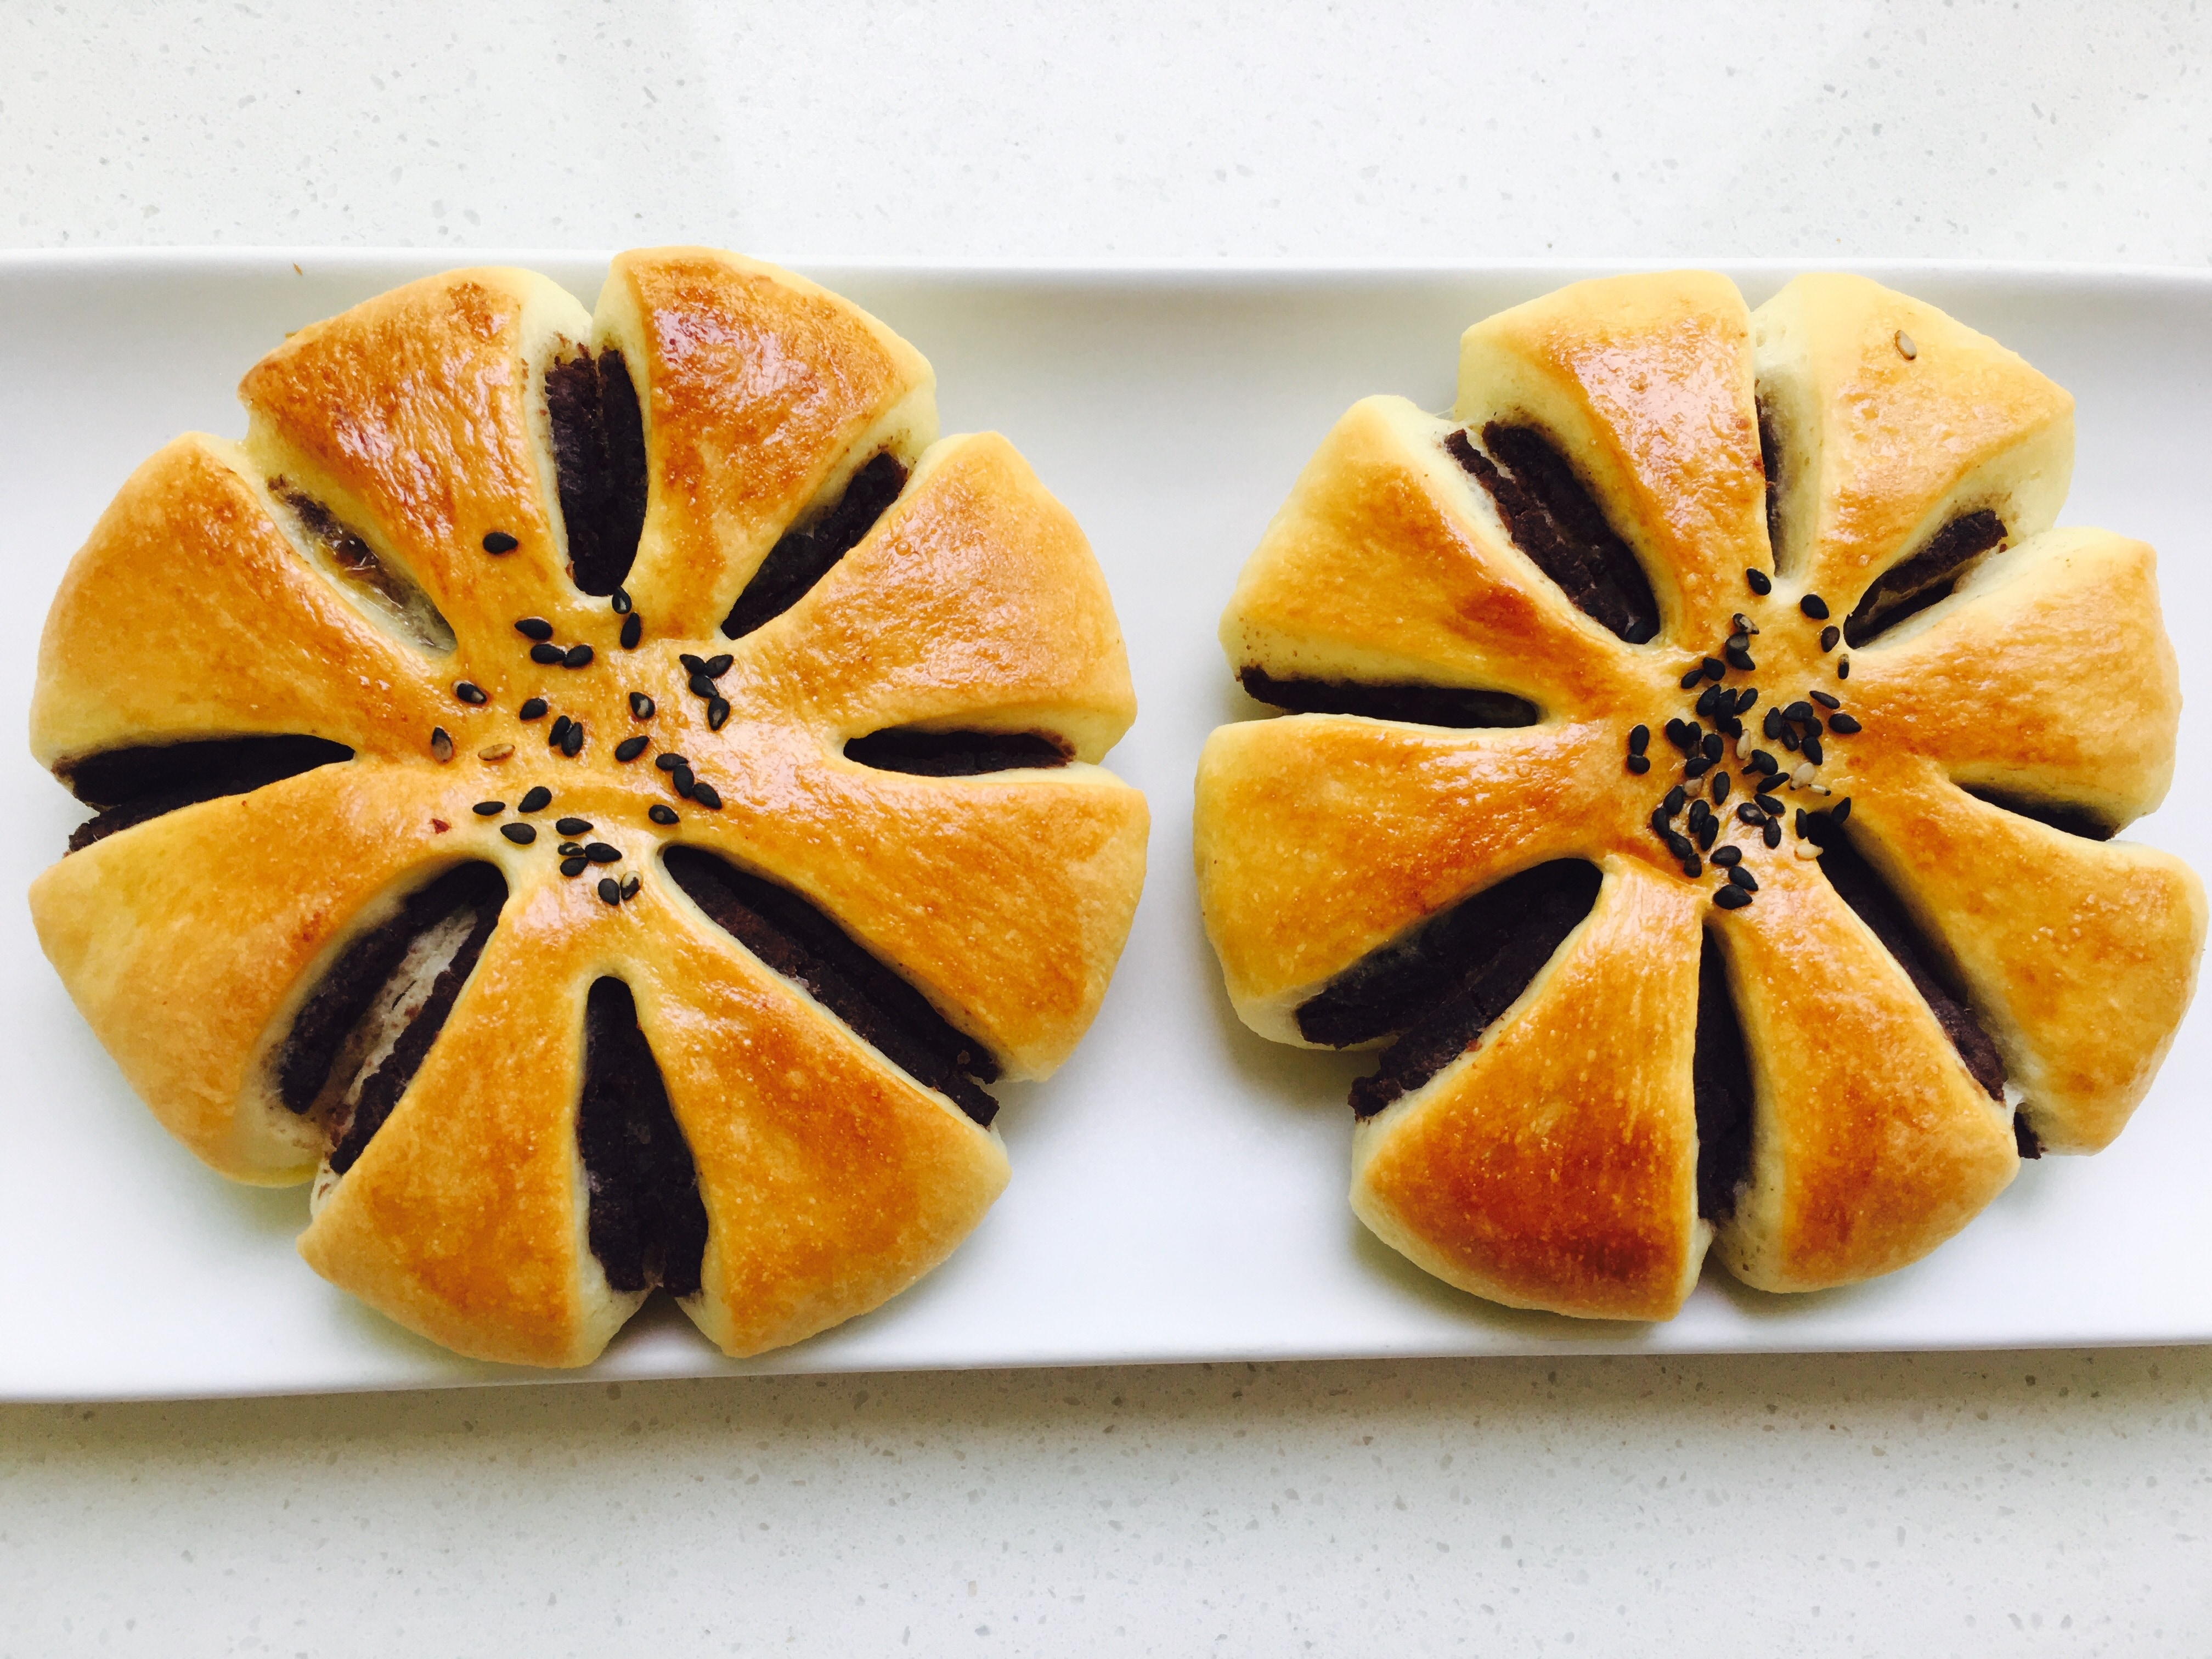 2 baked round pastries